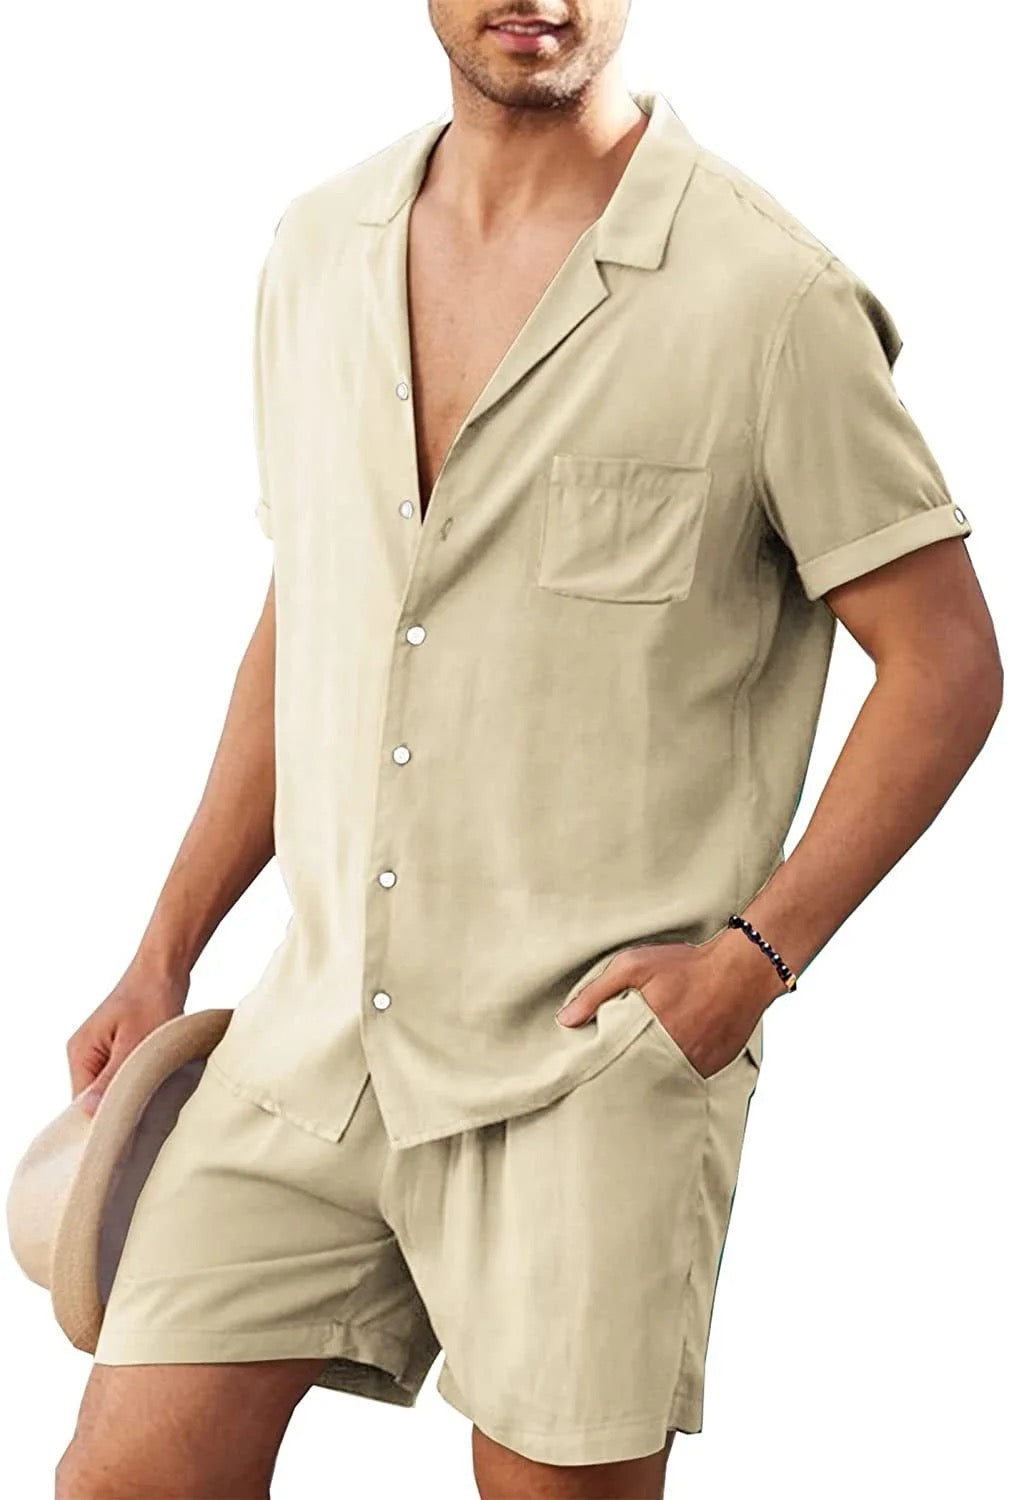 Linne/Bomulls set, Relaxed fit - Beige